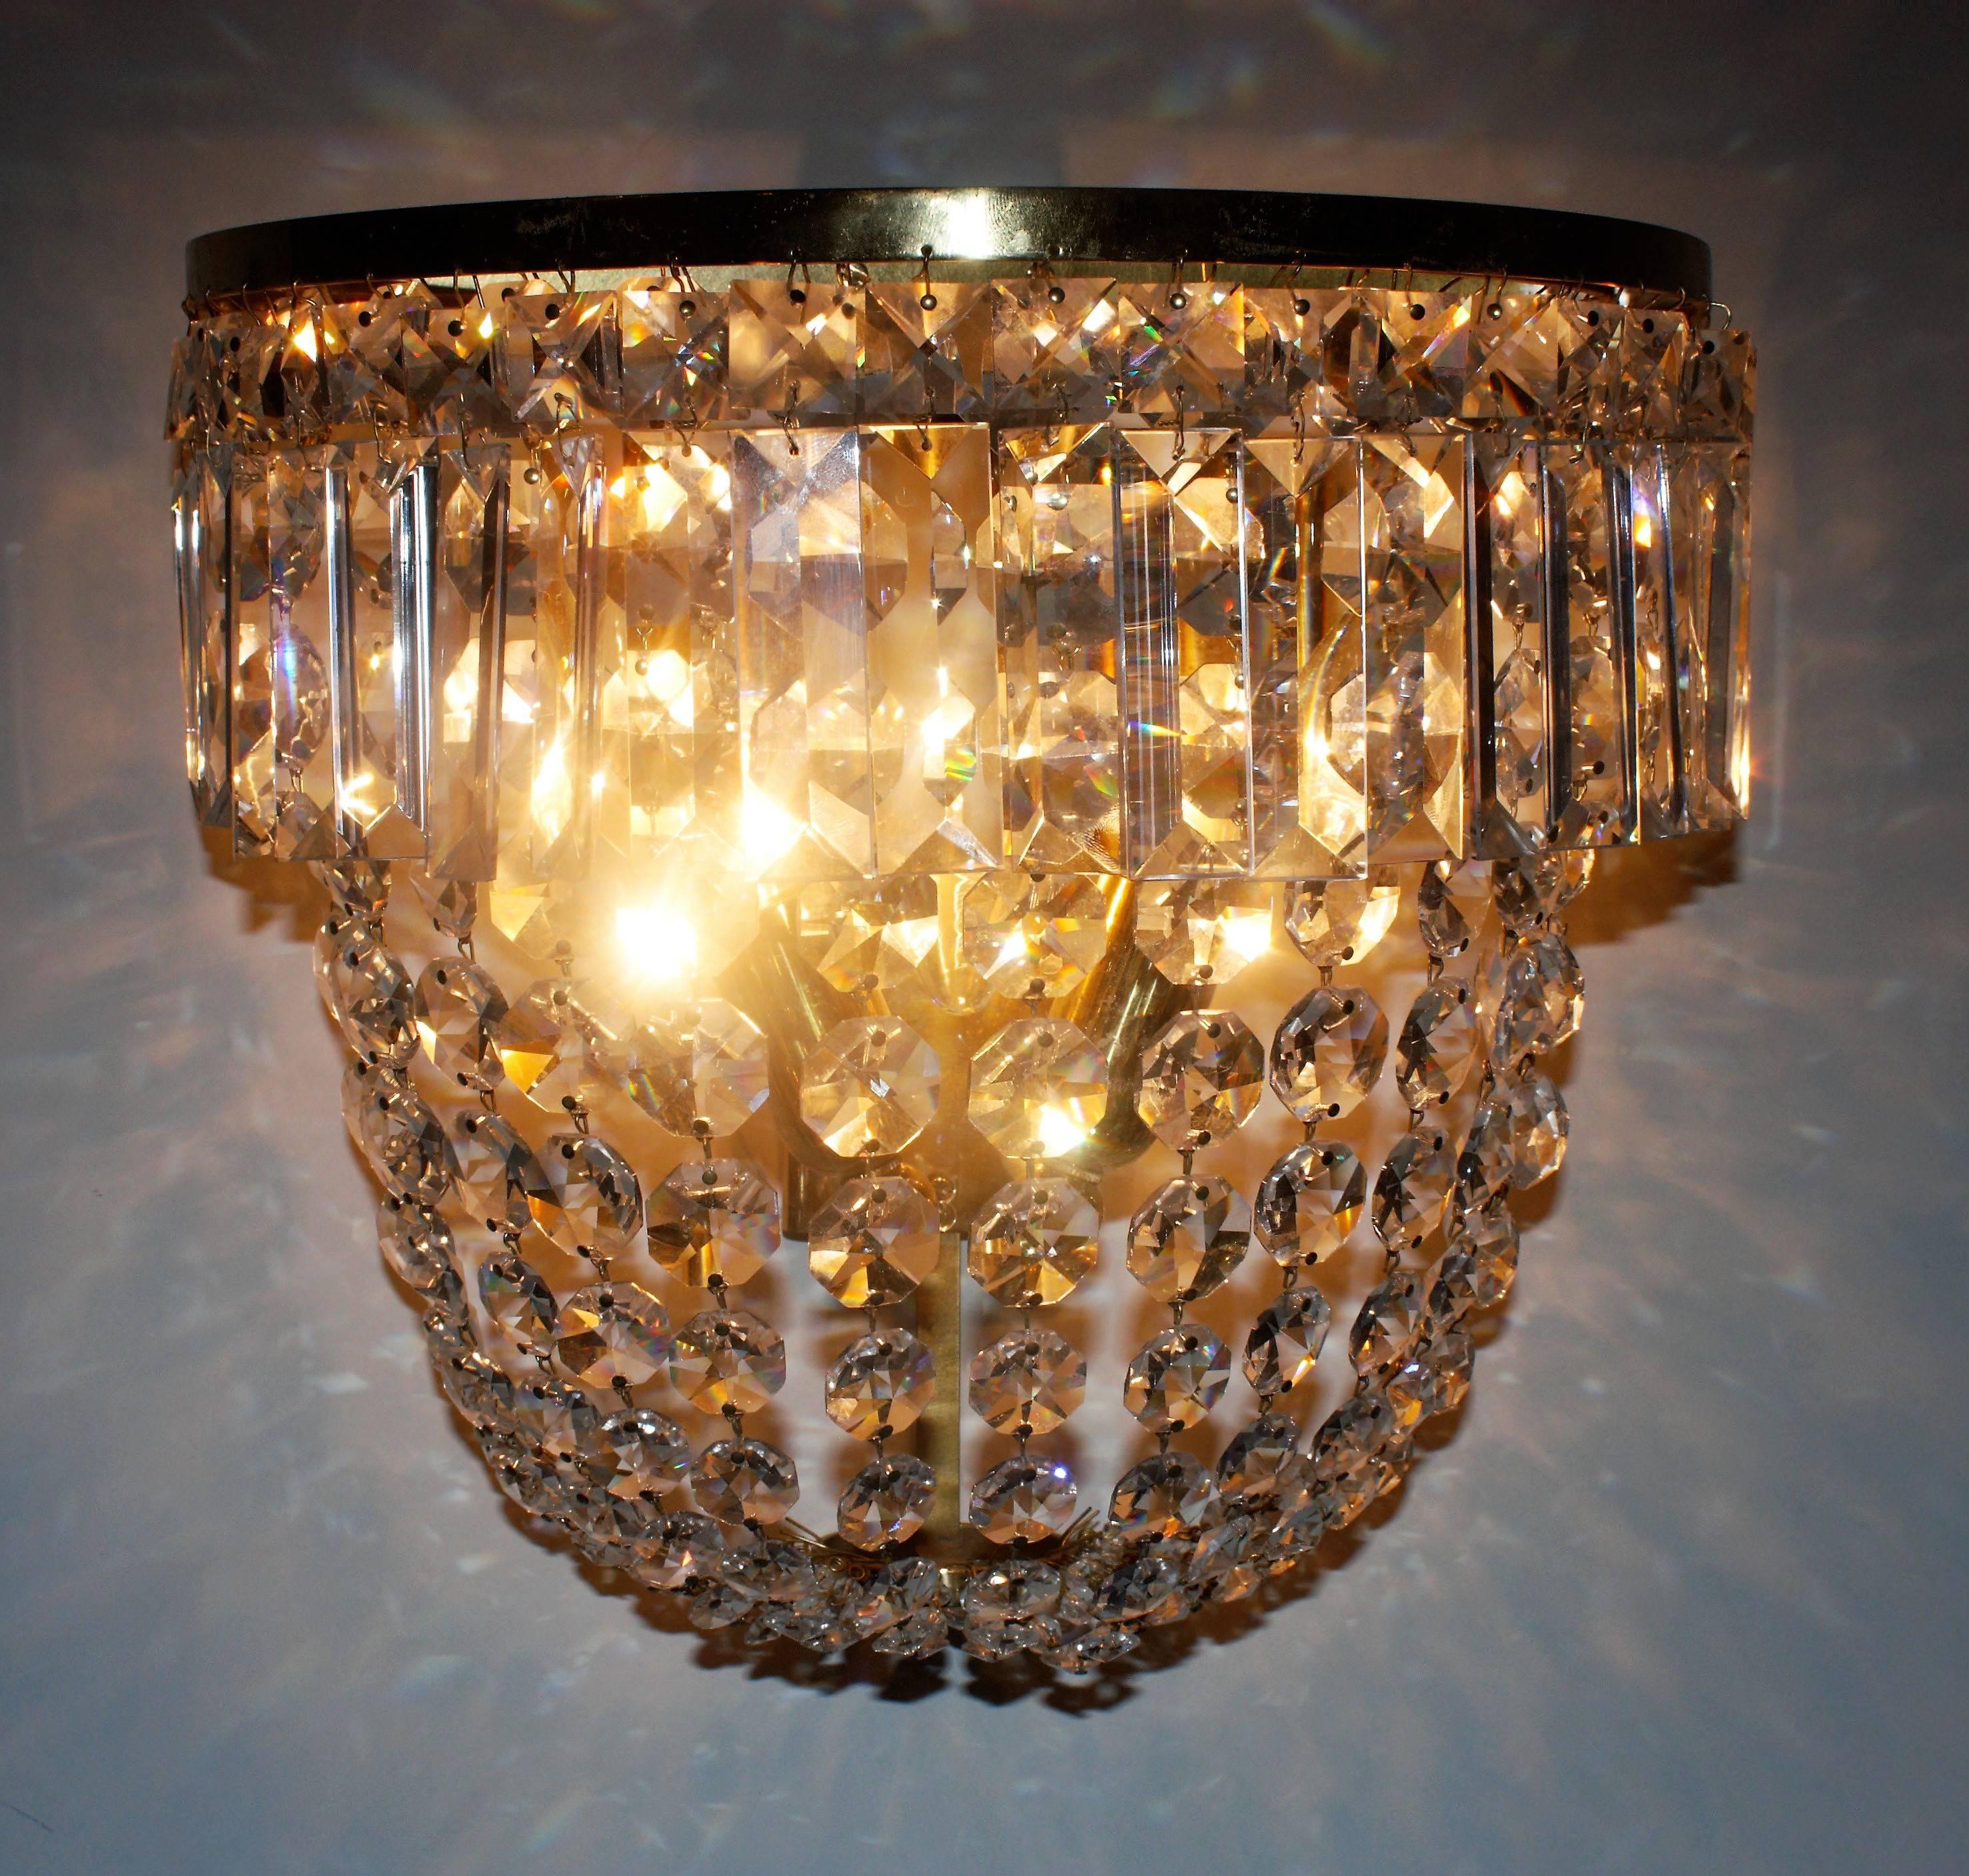 Grand pair of stunning high quality three-light handcrafted wall sconces by high- end manufacture Ernst Palme (Palwa), Germany, circa 1960s.
Beautiful hand-cut crystal on a gilt brass frame.
Both sconces are cleaned and in a very good condition